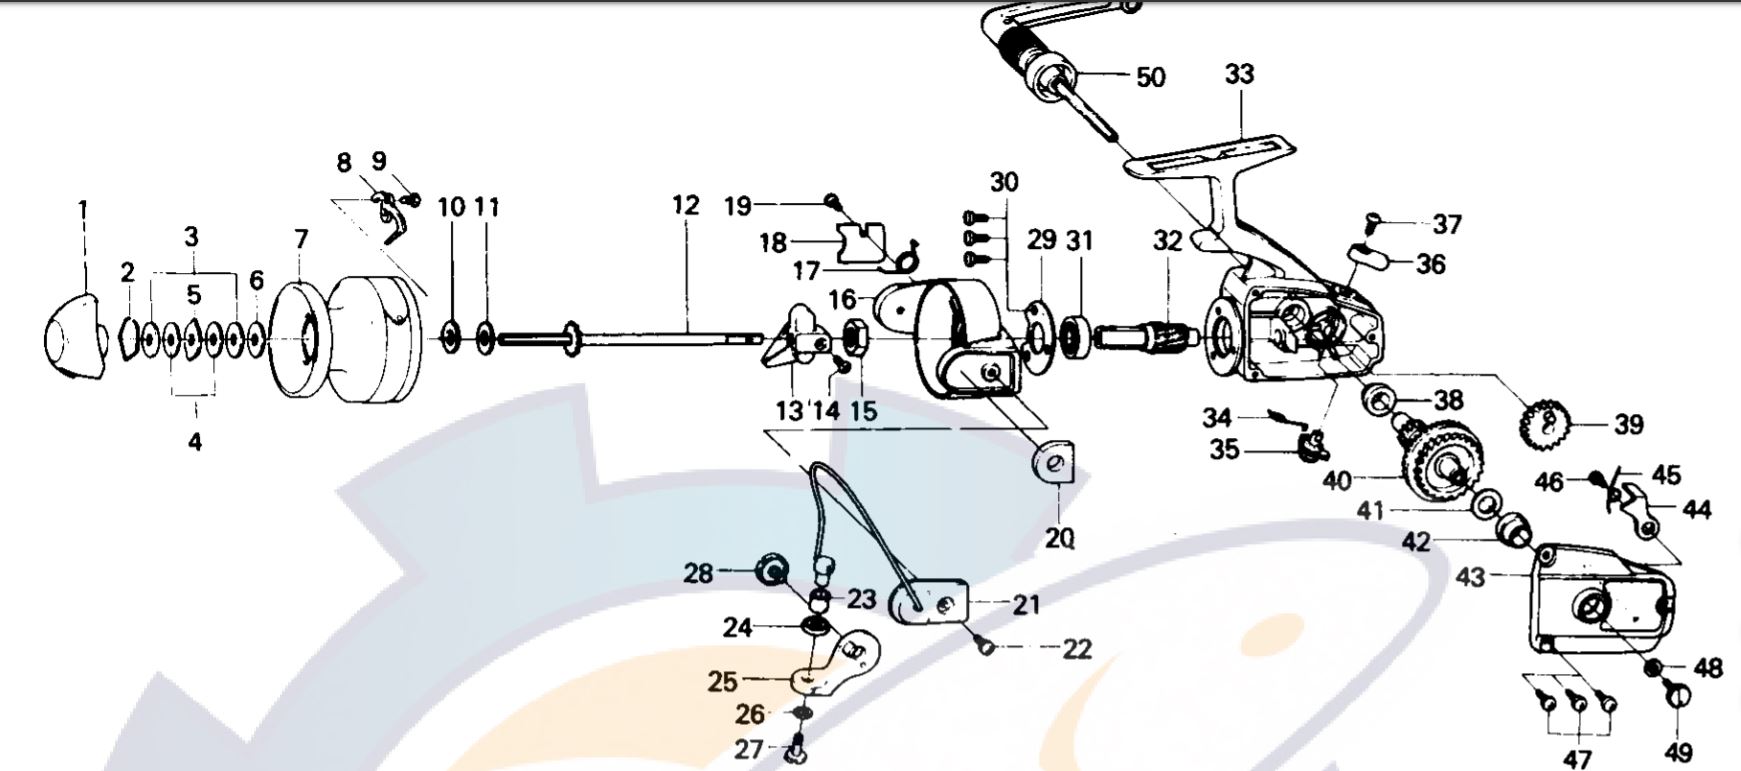 DAIWA RS-1300 RS-1600 spinning reel schematic and parts foldout made in  Japan